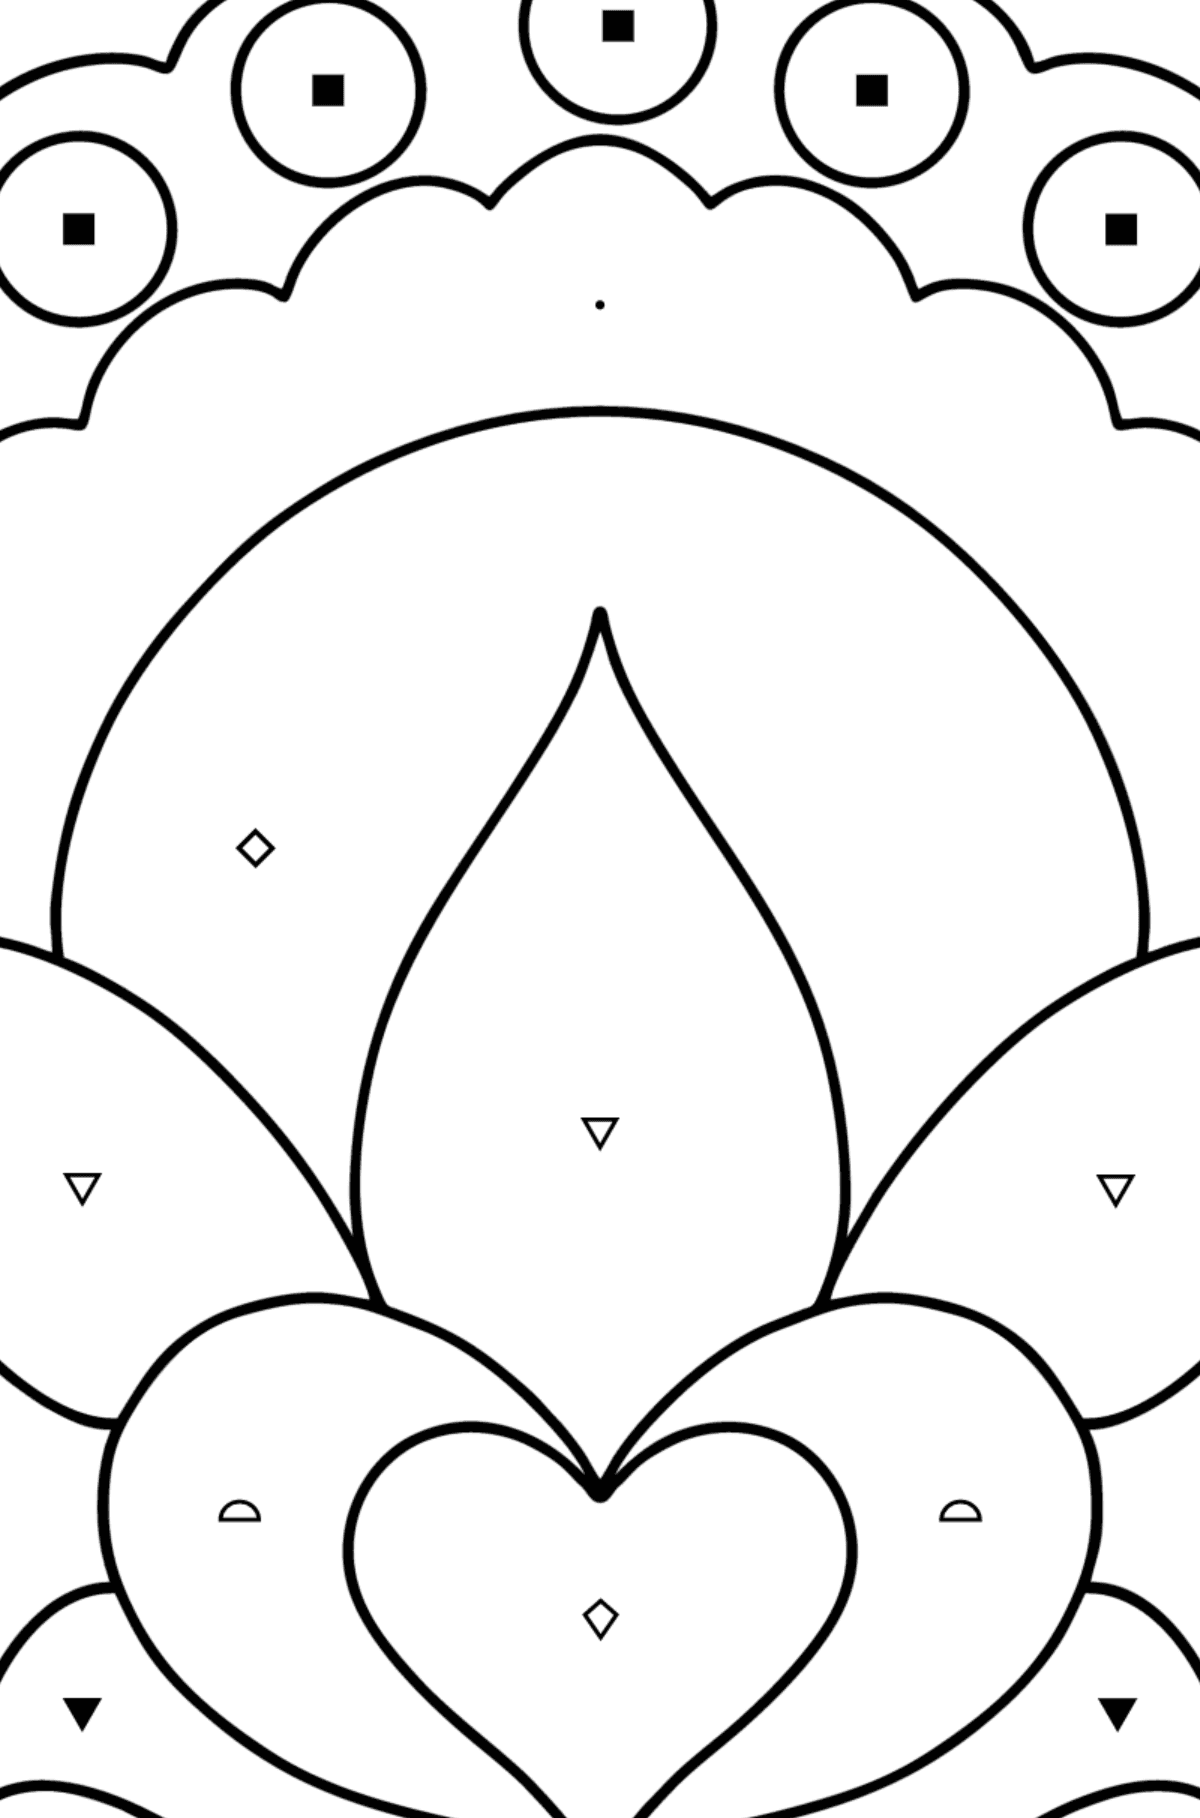 Simple coloring page - Flower Anti stress - Coloring by Symbols and Geometric Shapes for Kids